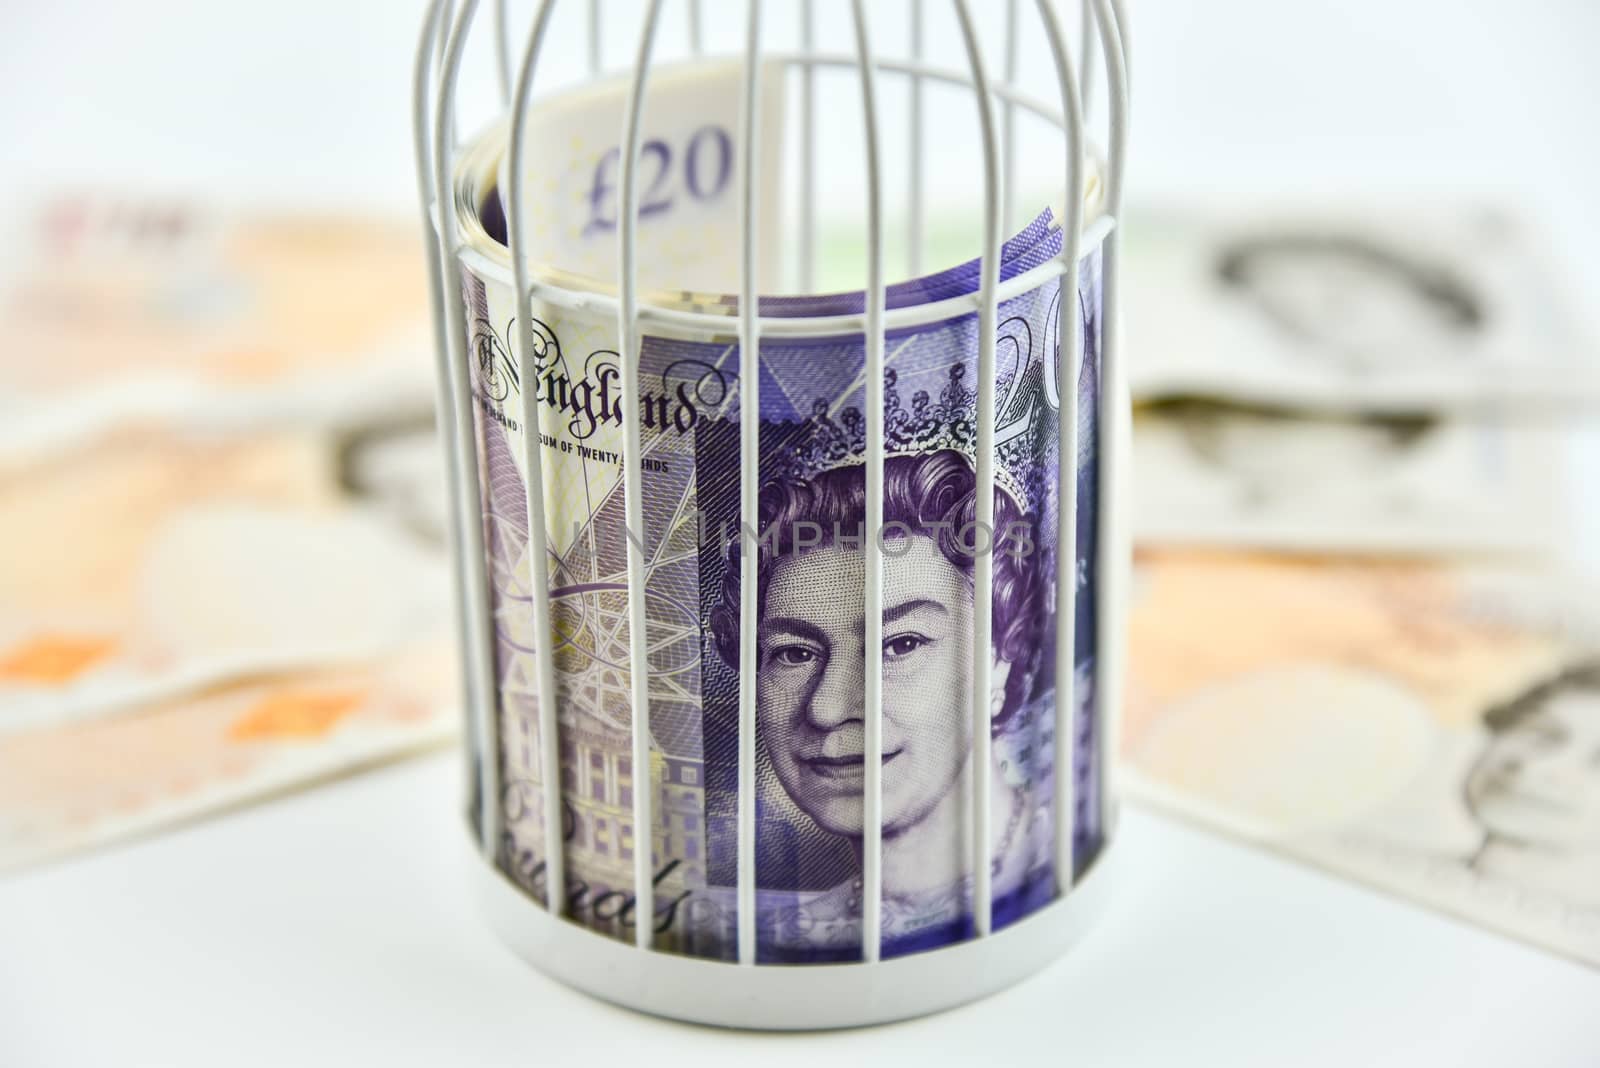 Banknotes trapped inside the cage, behind bars